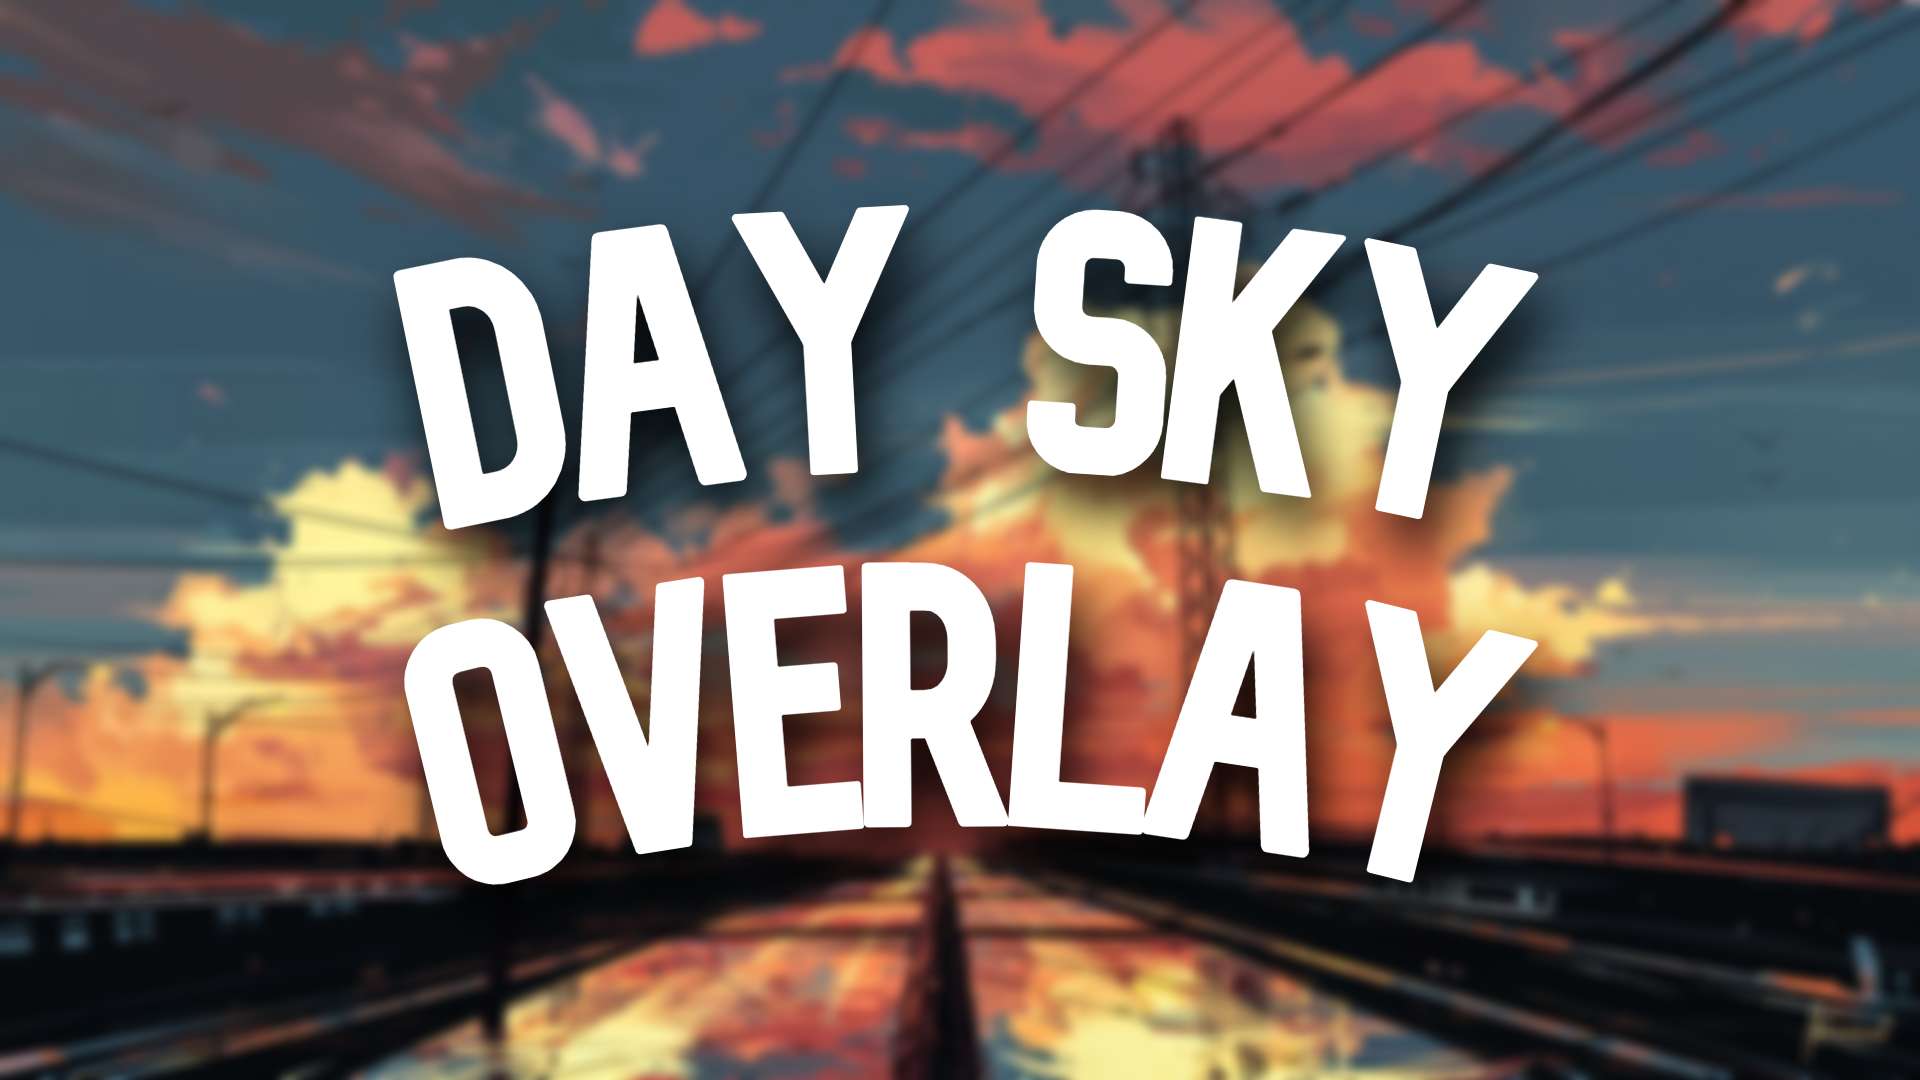 Day Sky Overlay #13 16x by rh56 on PvPRP